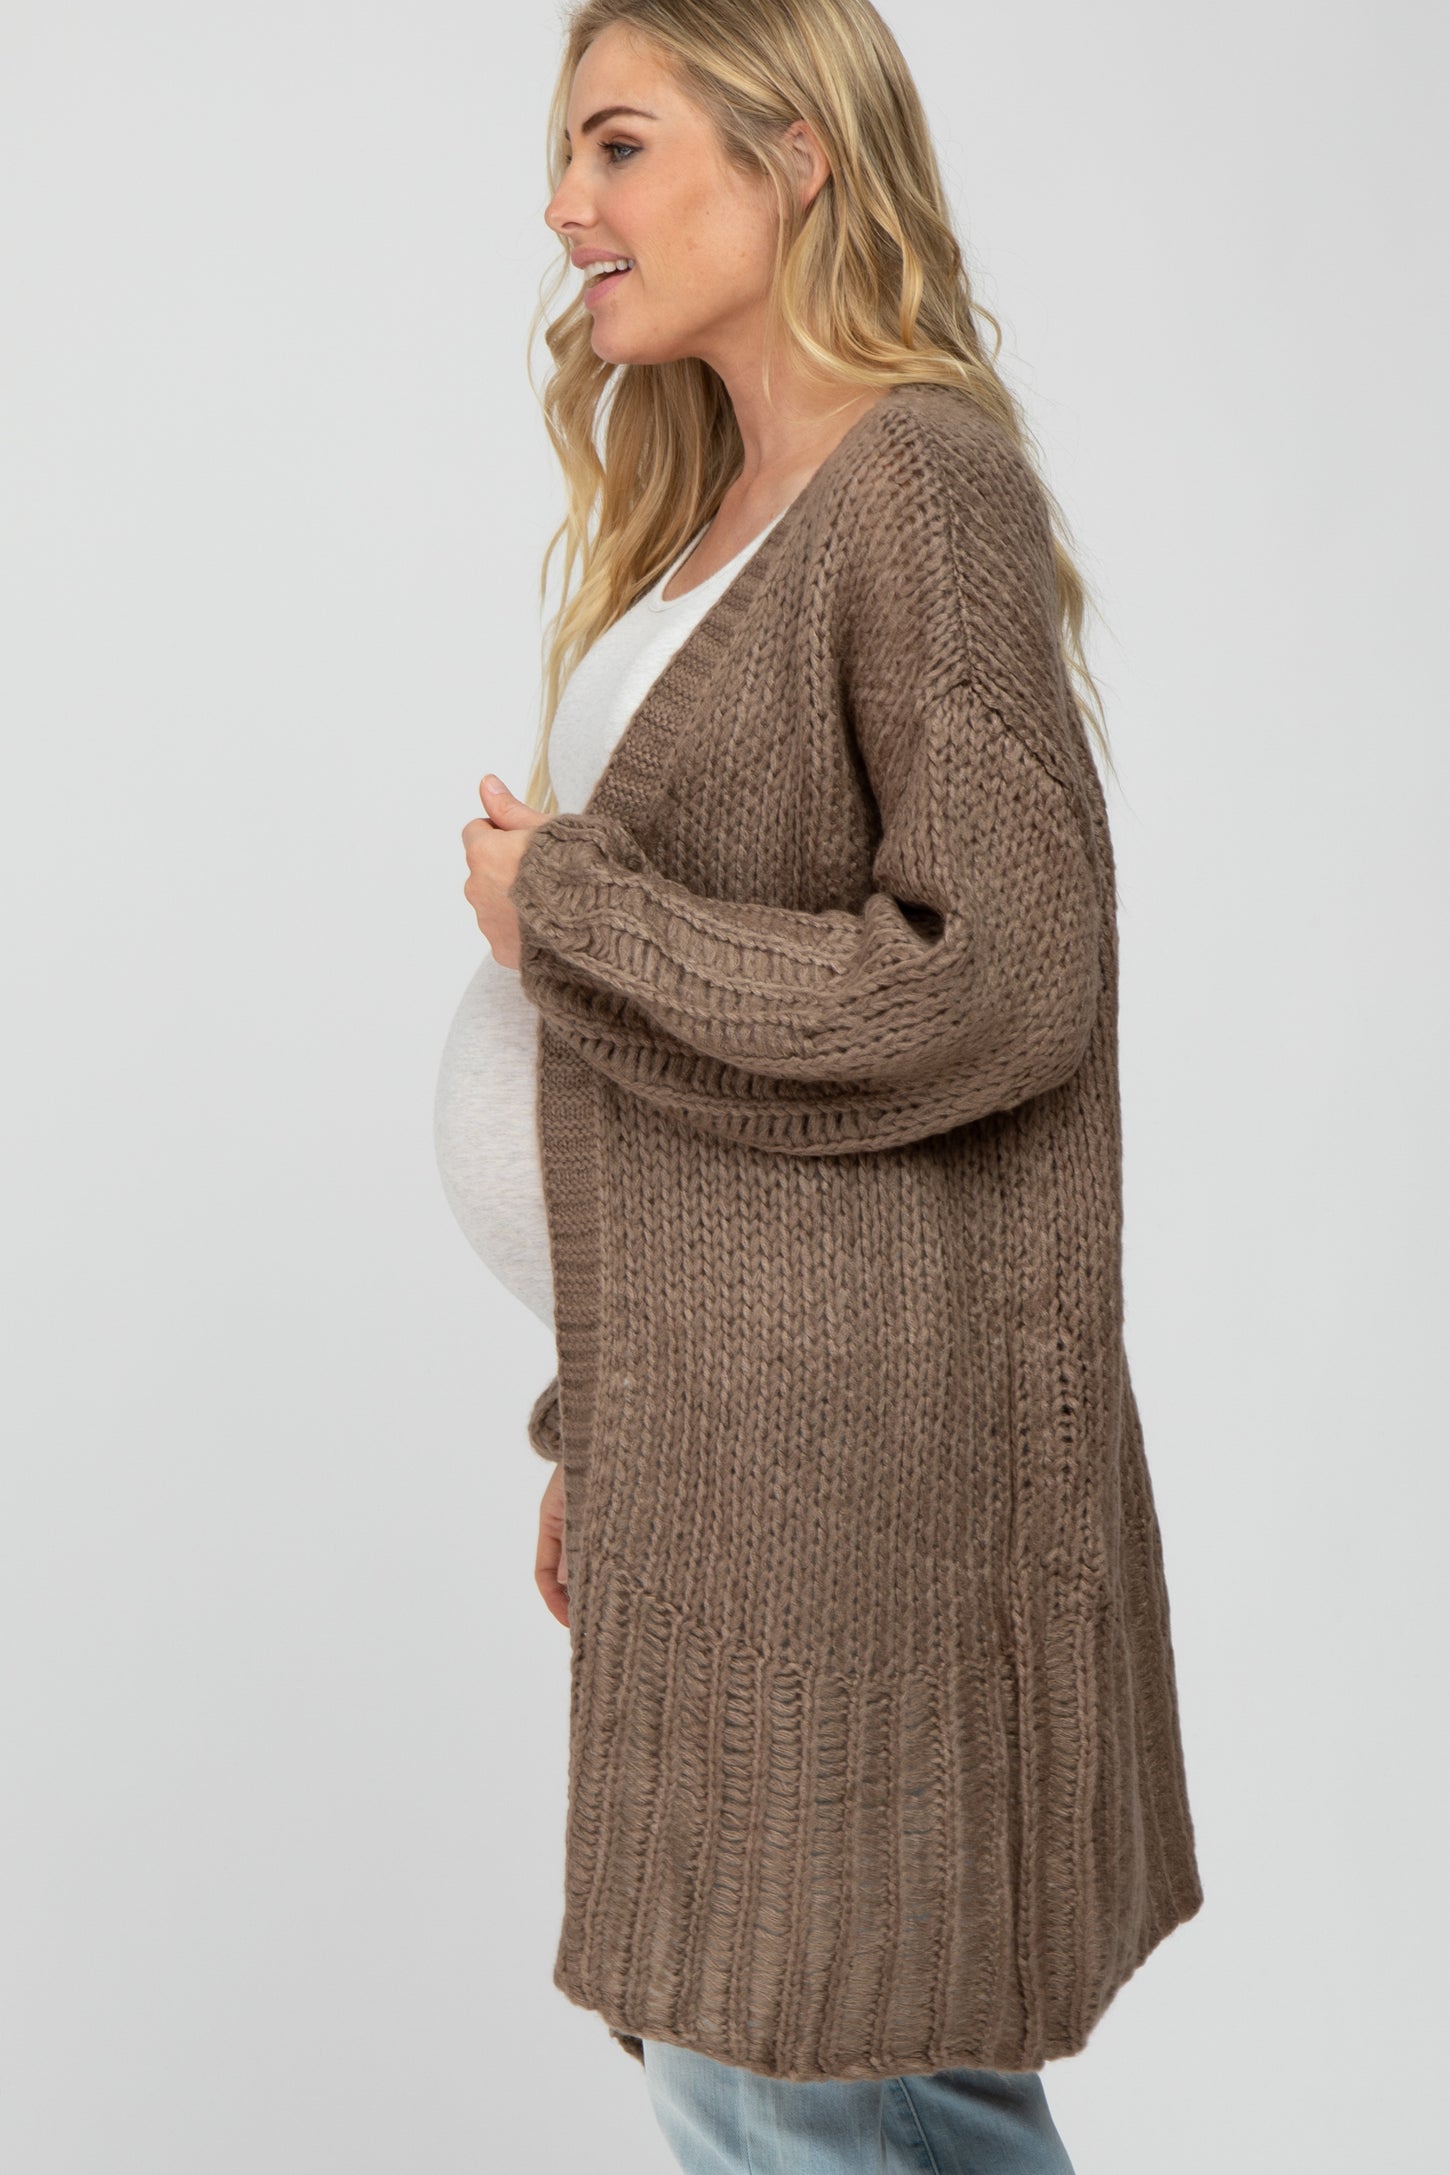 Taupe Open Knit Maternity Cardigan Sweater